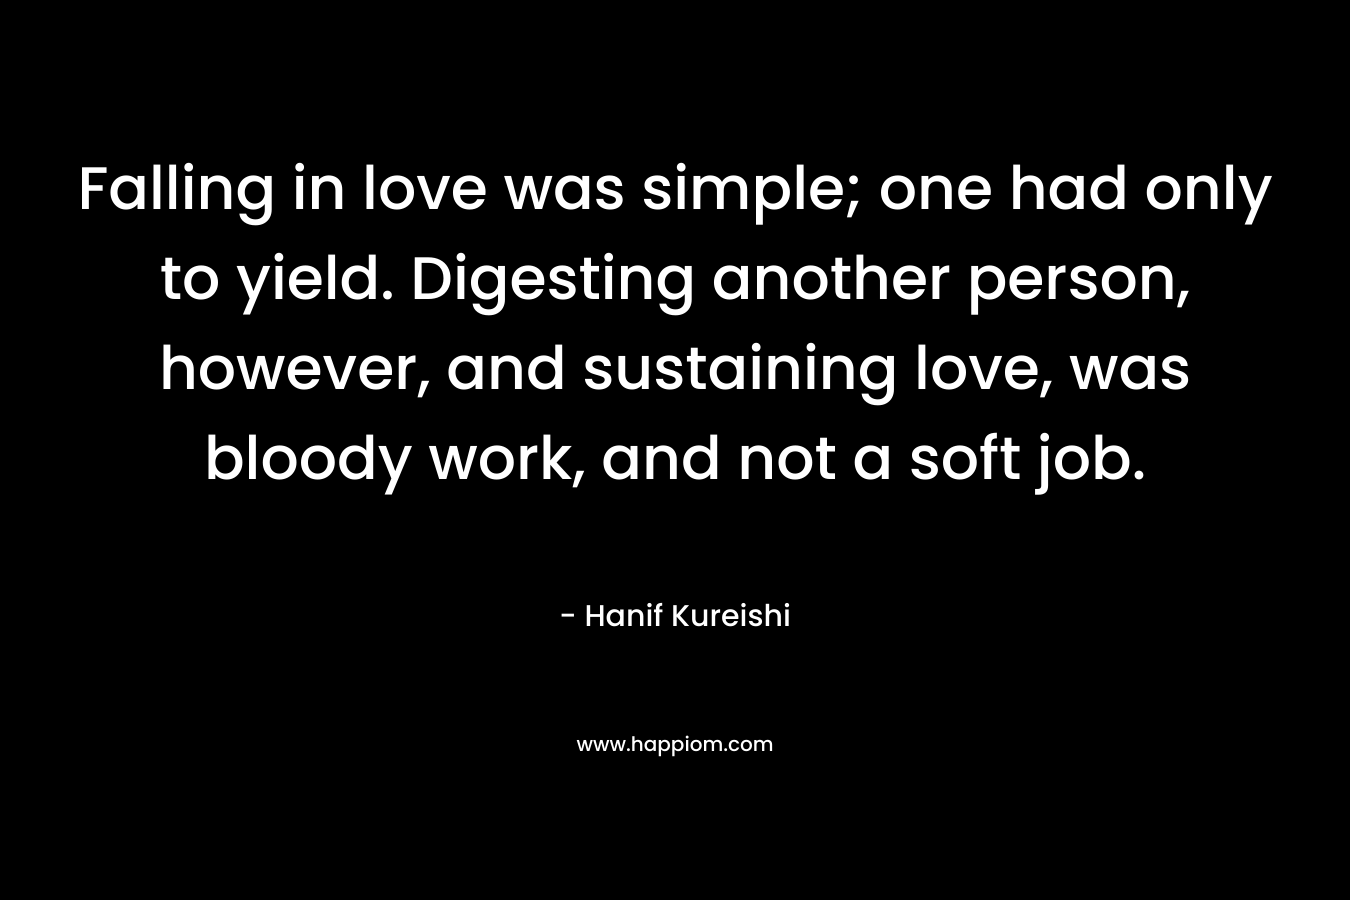 Falling in love was simple; one had only to yield. Digesting another person, however, and sustaining love, was bloody work, and not a soft job. – Hanif Kureishi